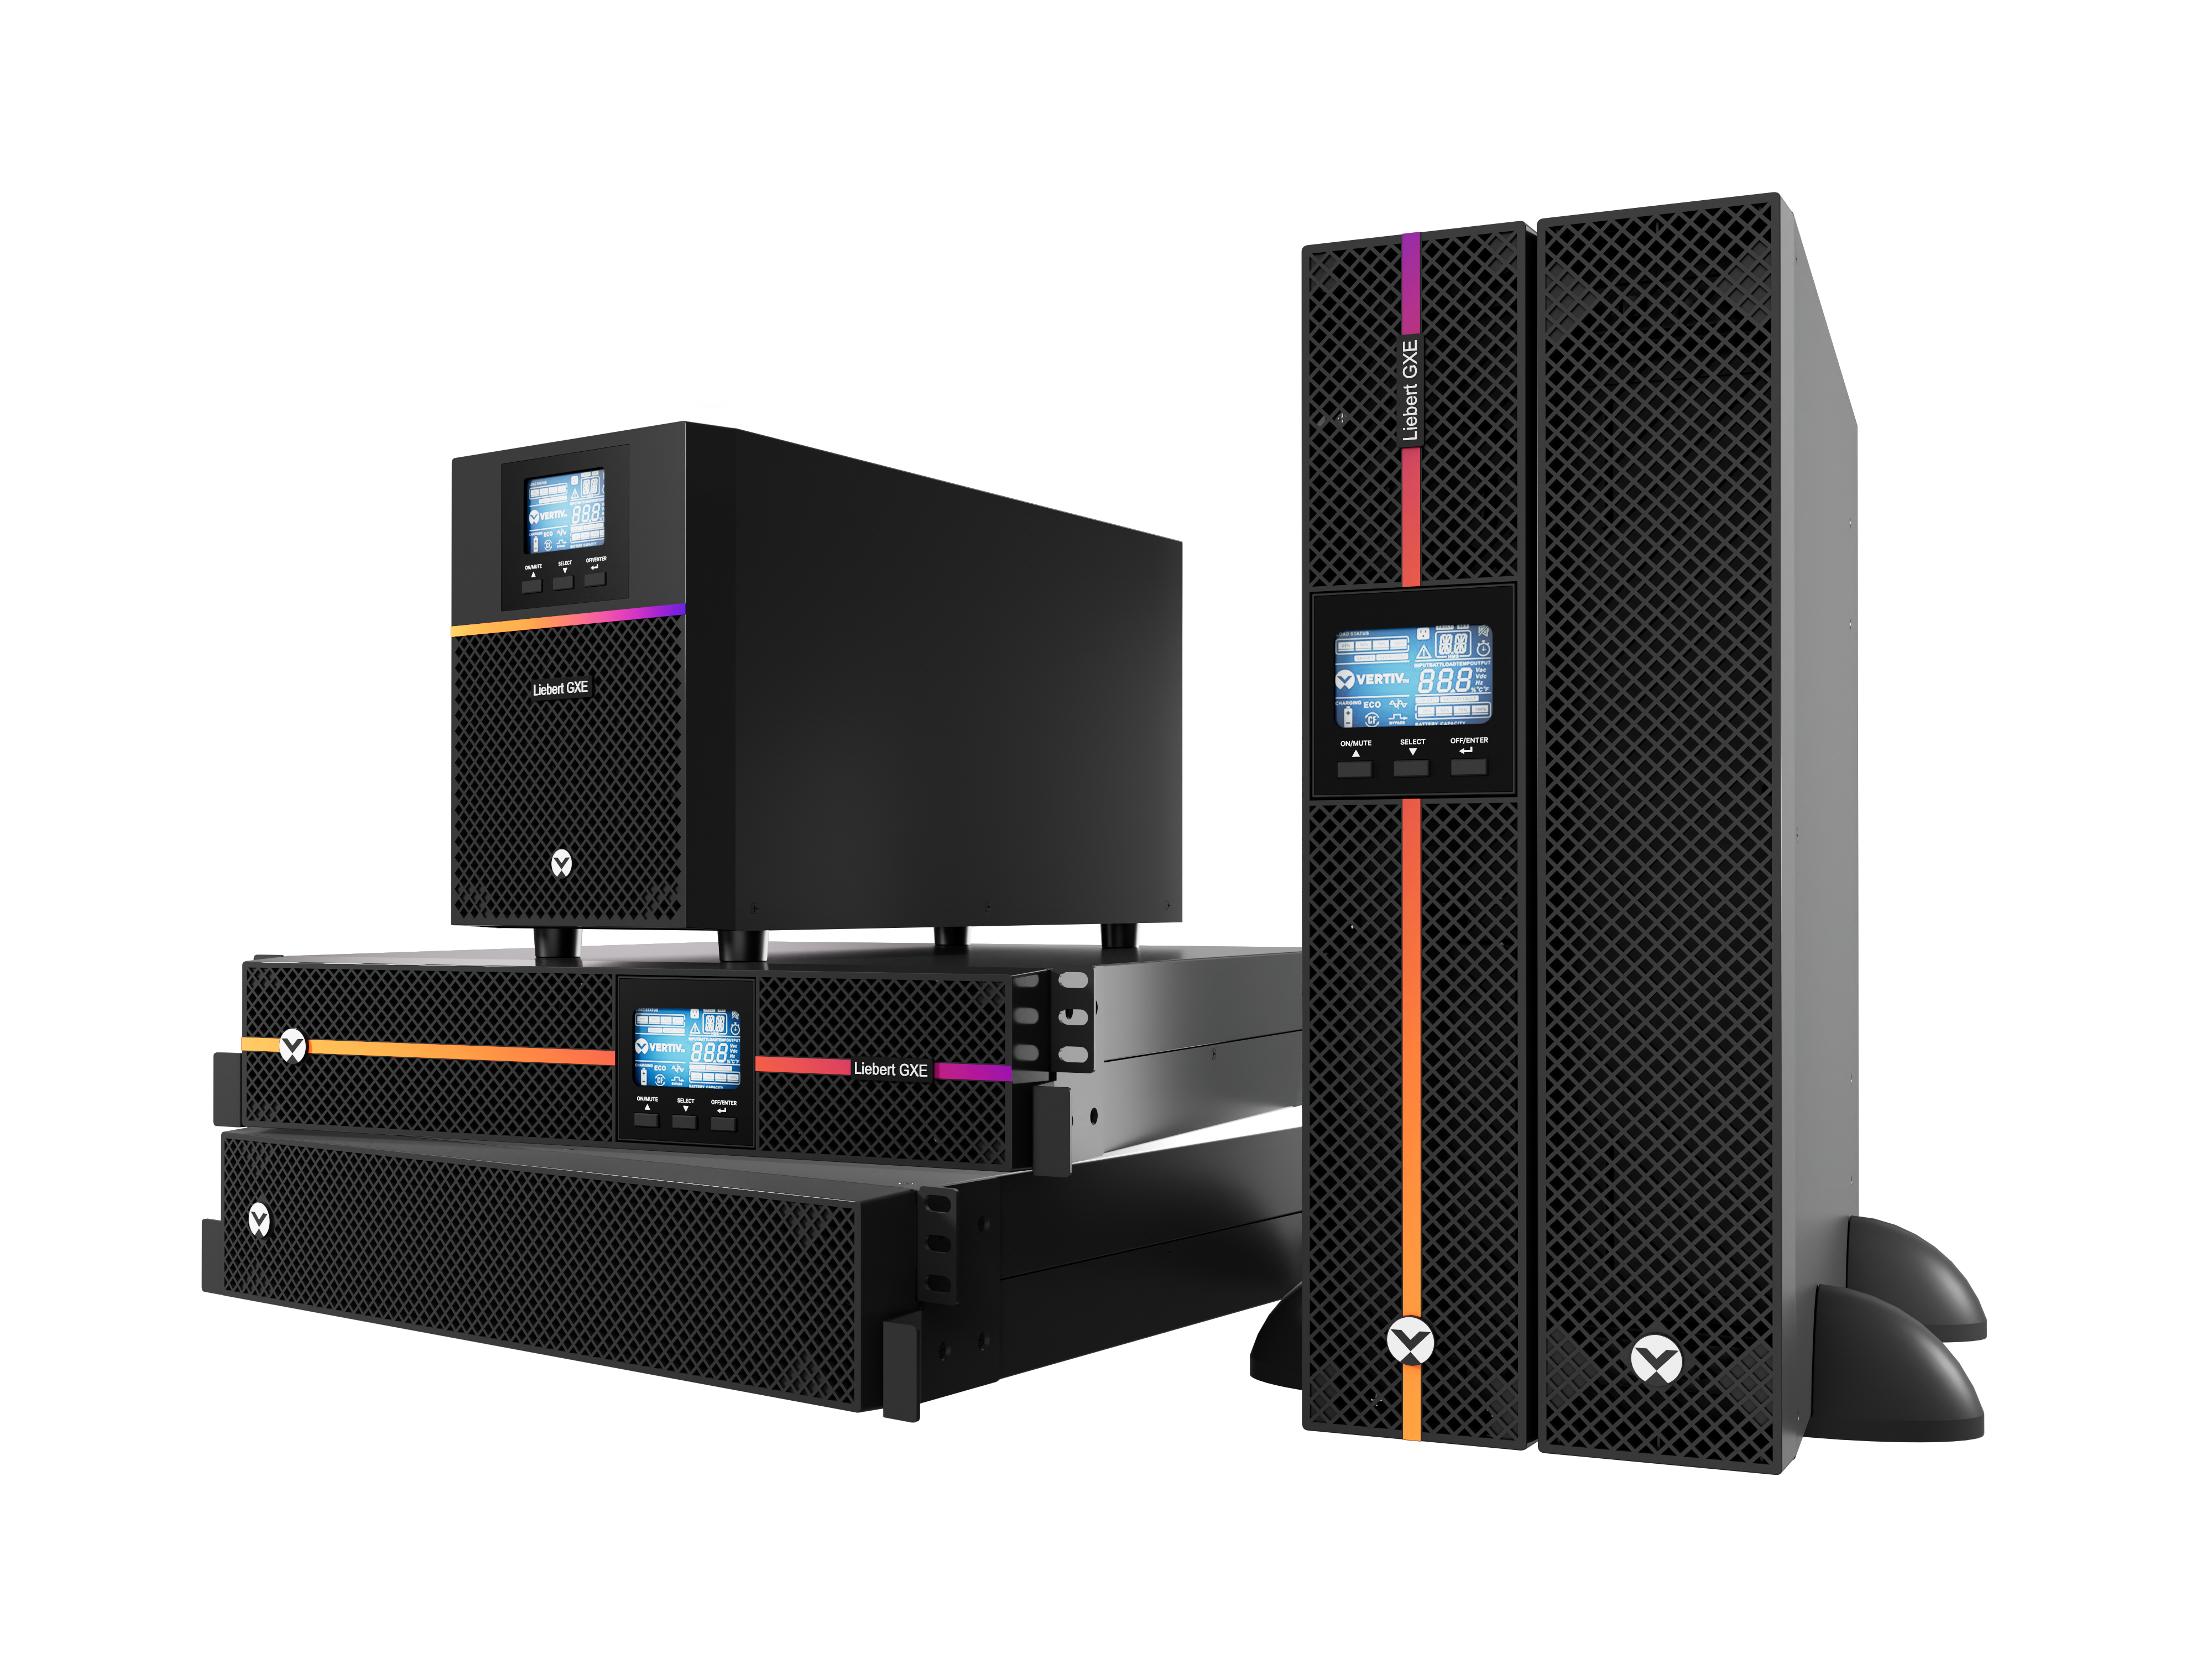 Vertiv Expands Single-Phase UPS Portfolio for Distributed IT Networks and Edge Computing in Asia, EMEA, and Latin America